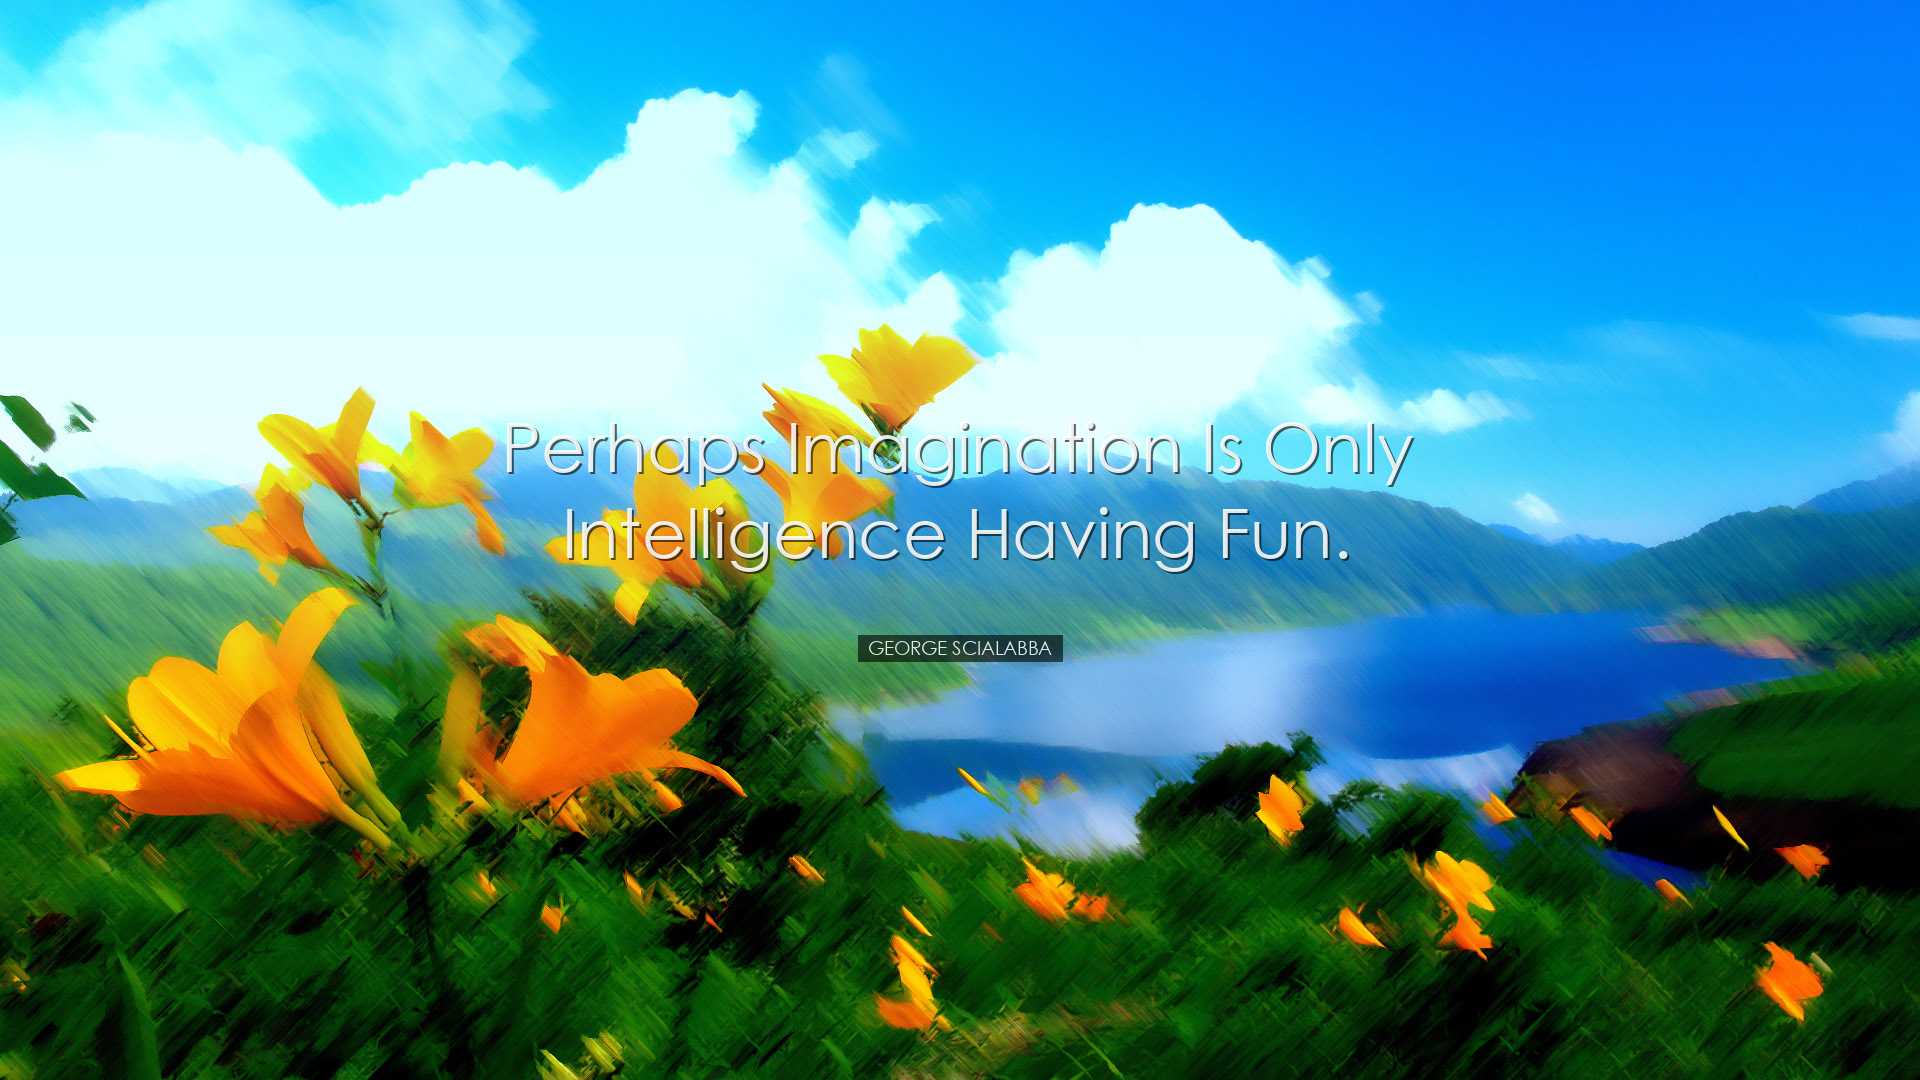 Perhaps imagination is only intelligence having fun. - George Scia